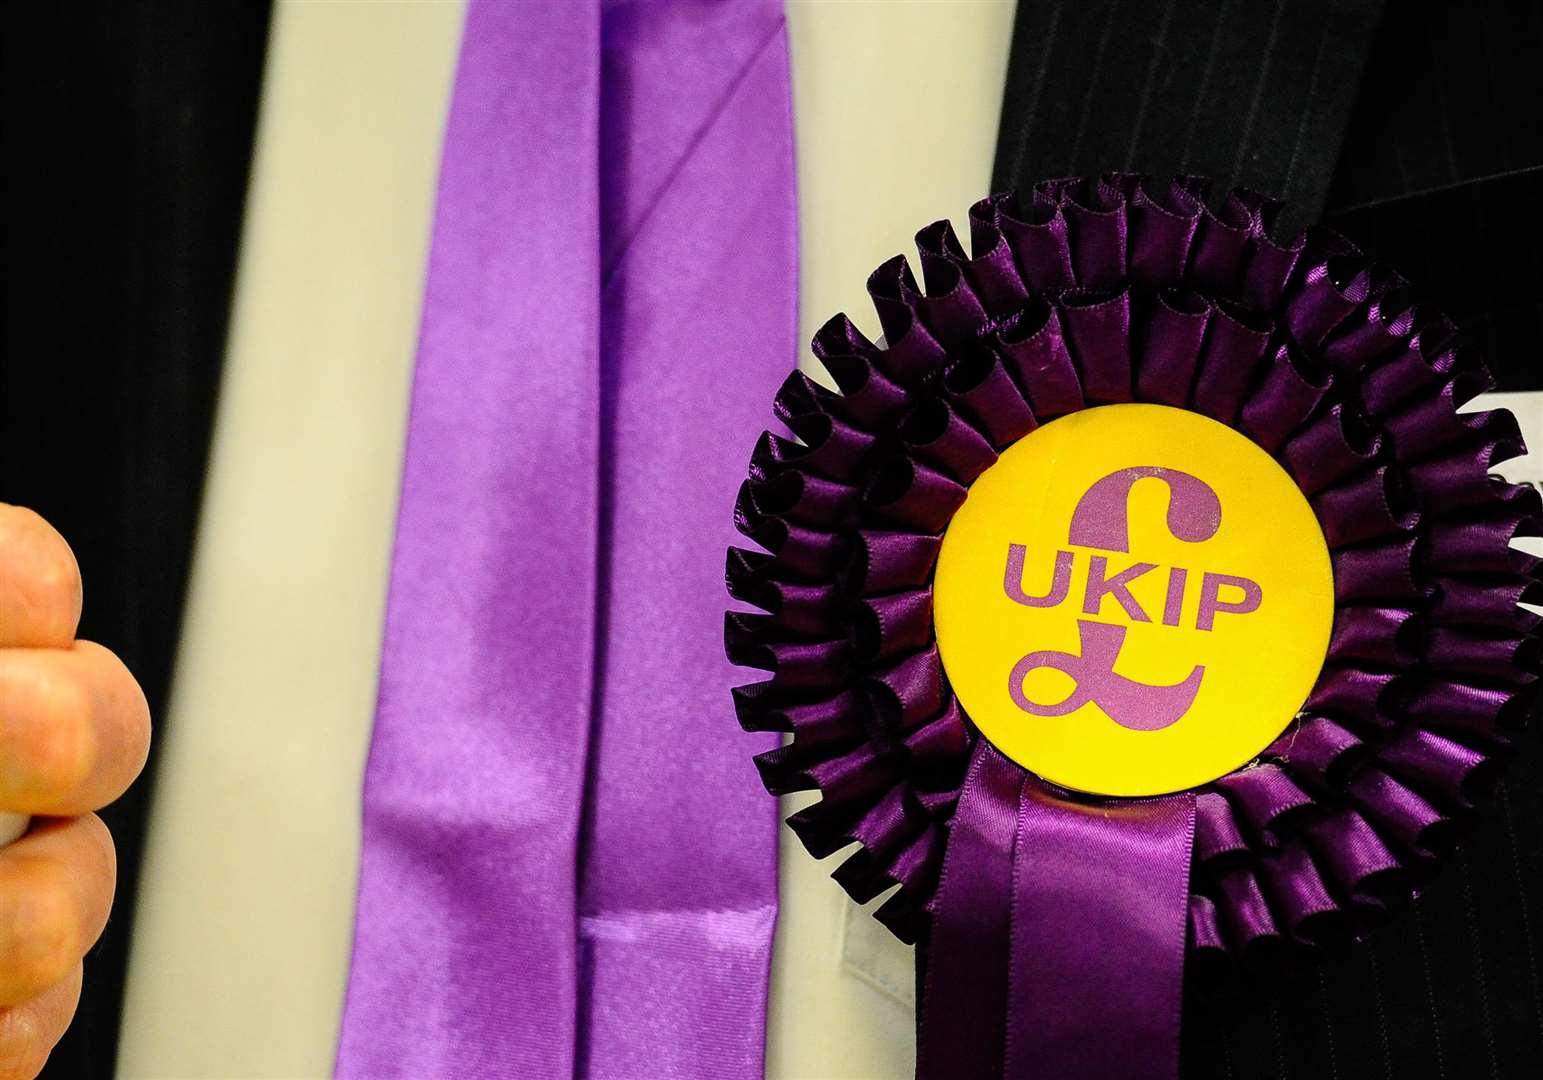 Ukip says 100 people in Kent have joined the party in recent months